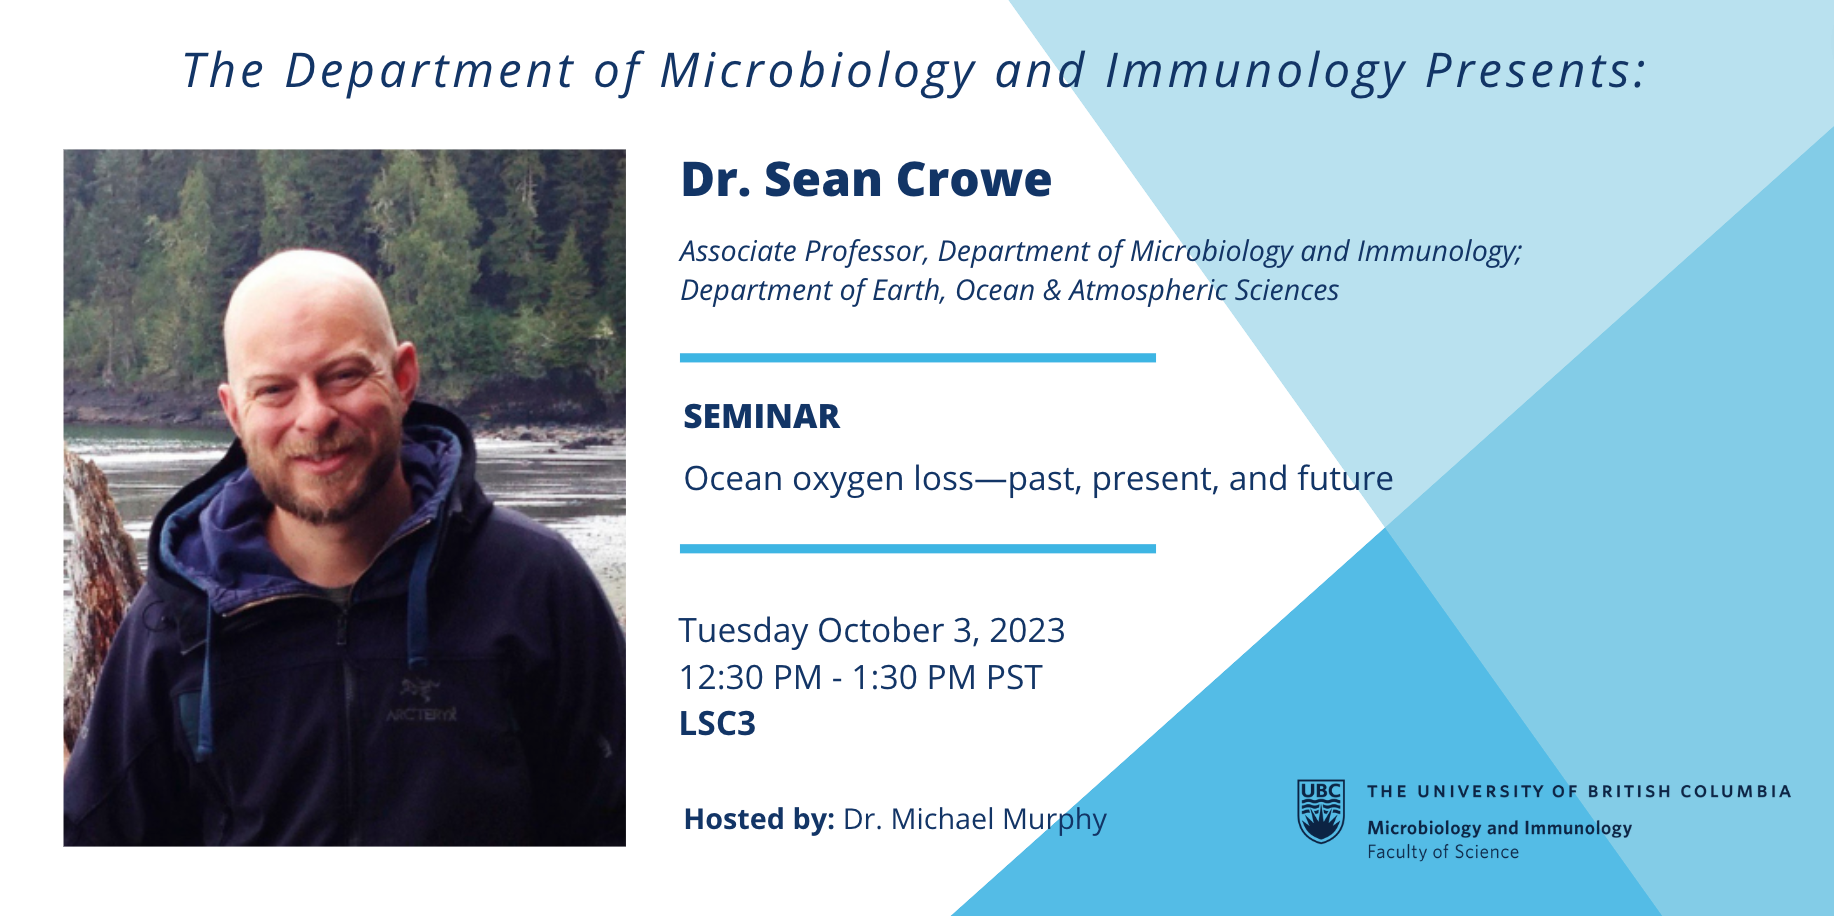 Poster promotion for Dr. Sean Crowe seminar